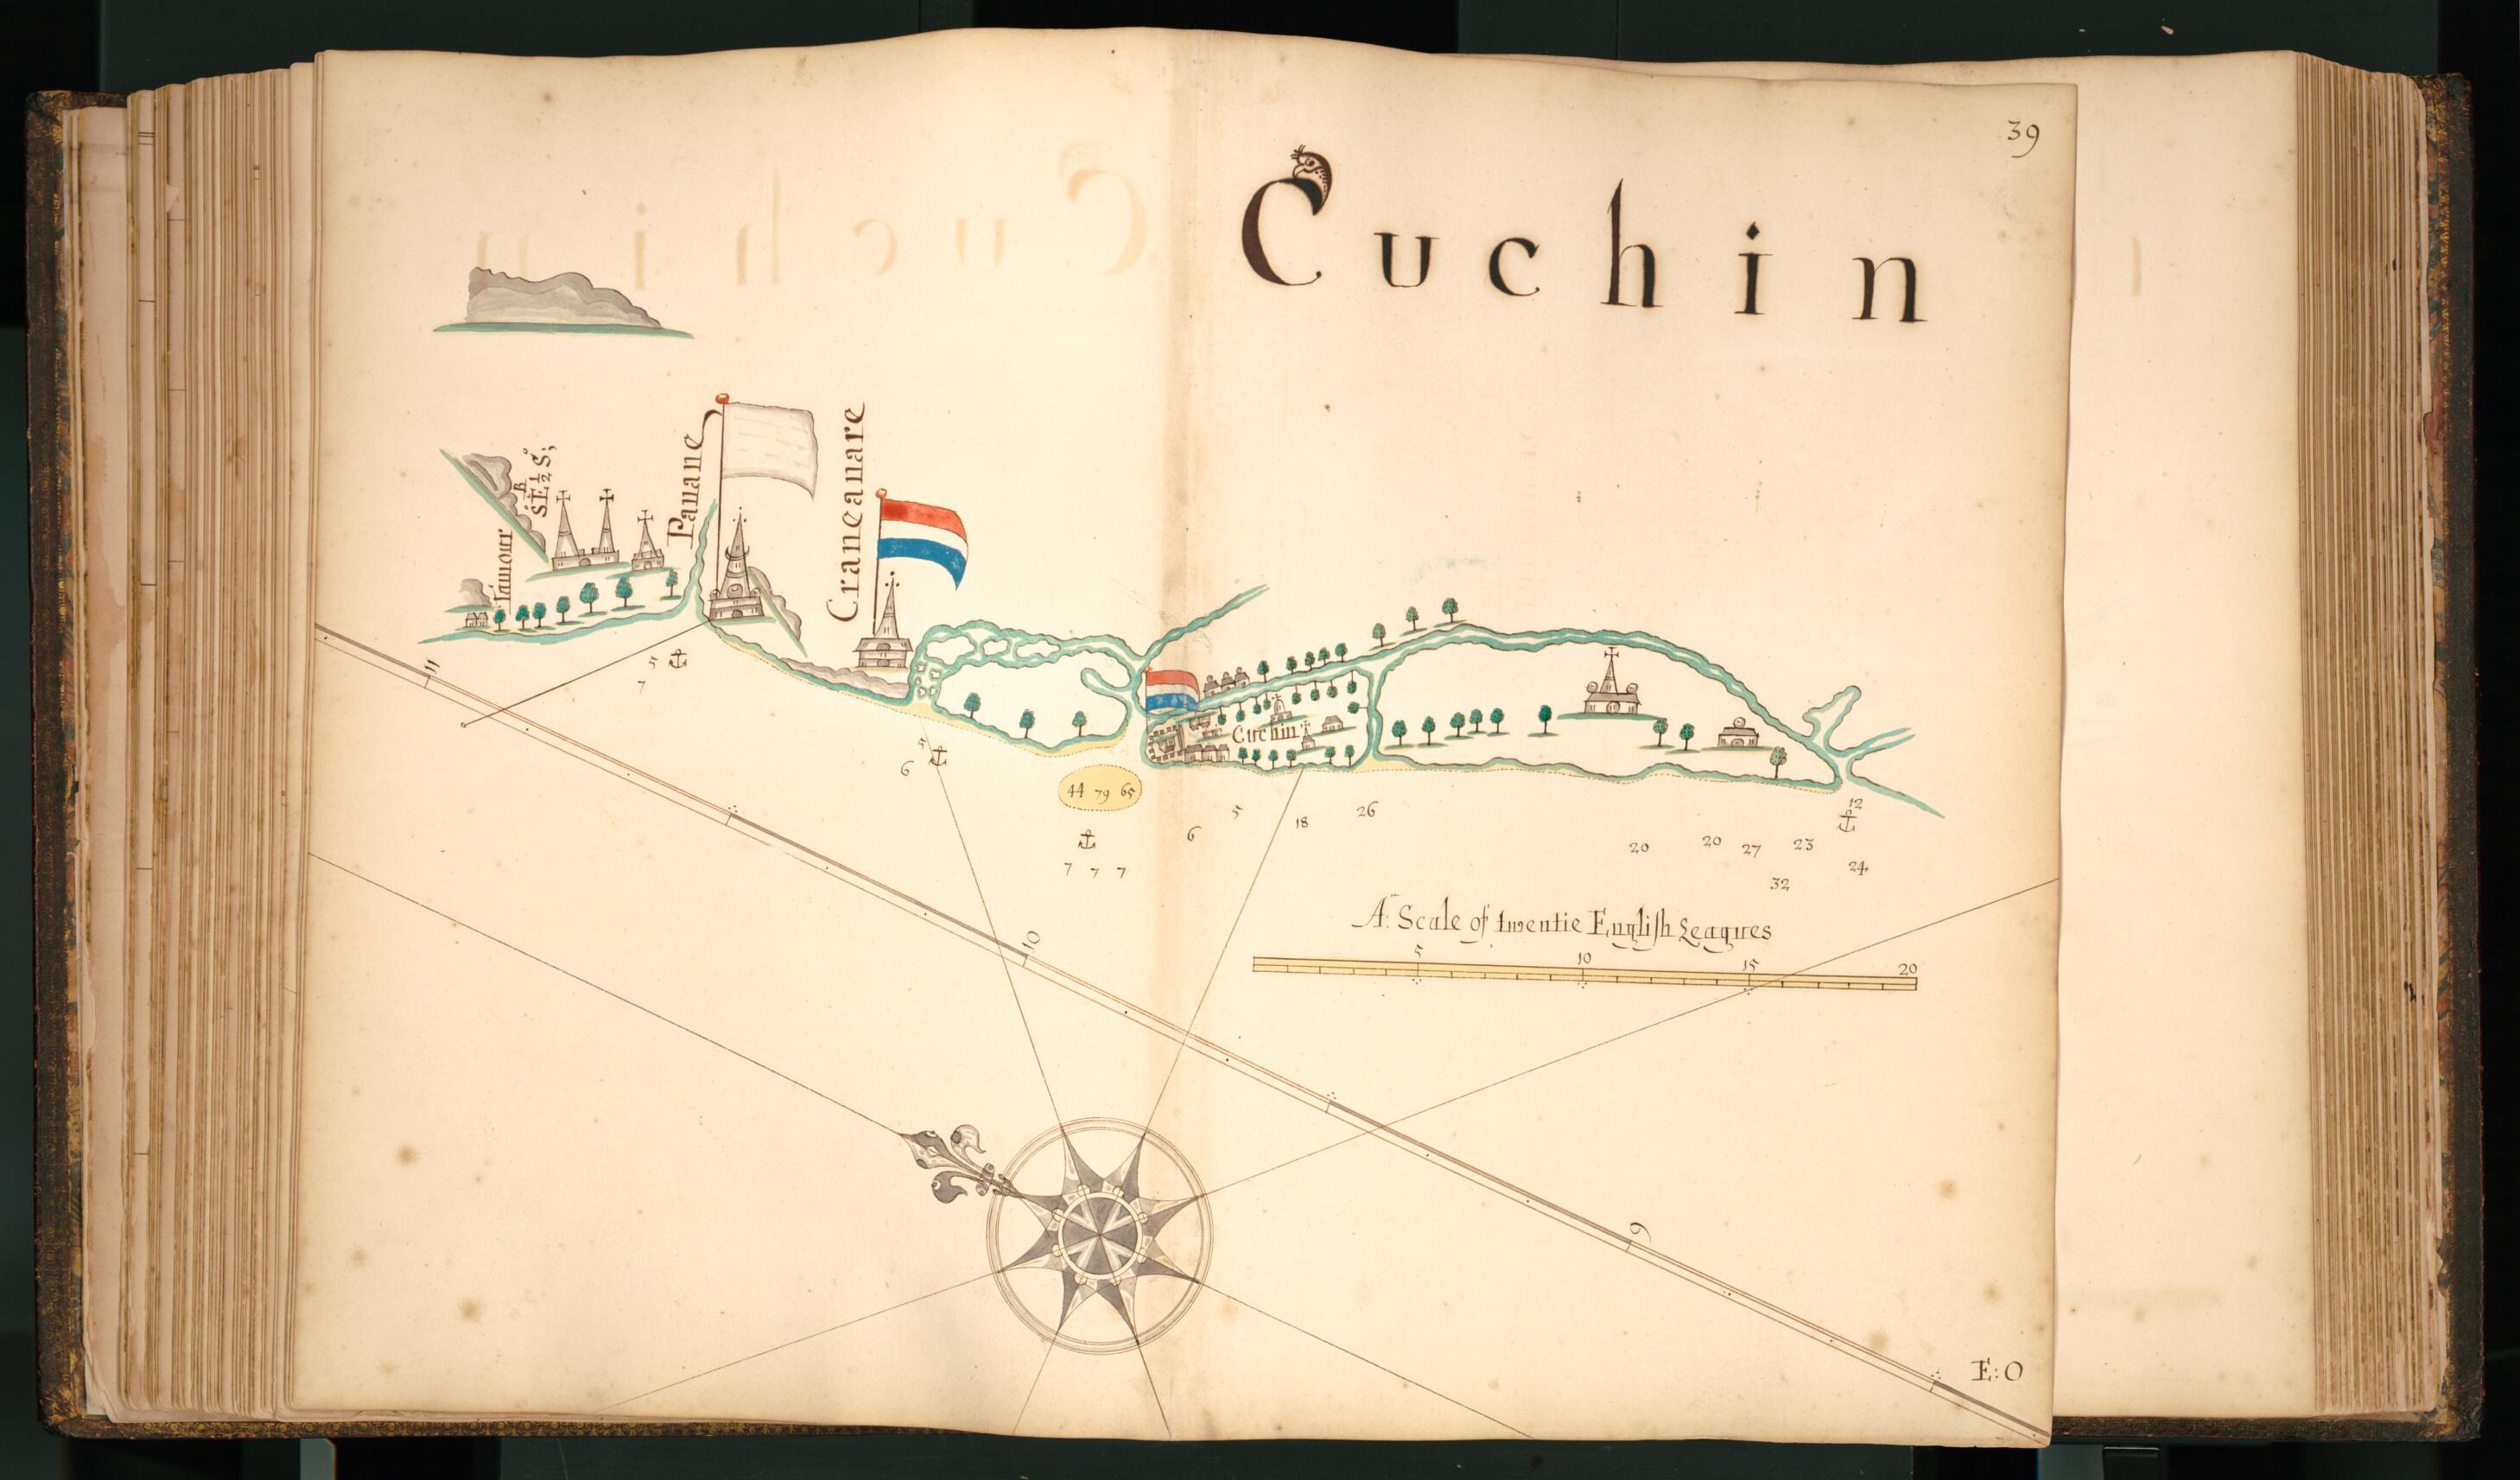 This old map of 39) Cuchin from Buccaneer Atlas from 1690 was created by William Hacke in 1690